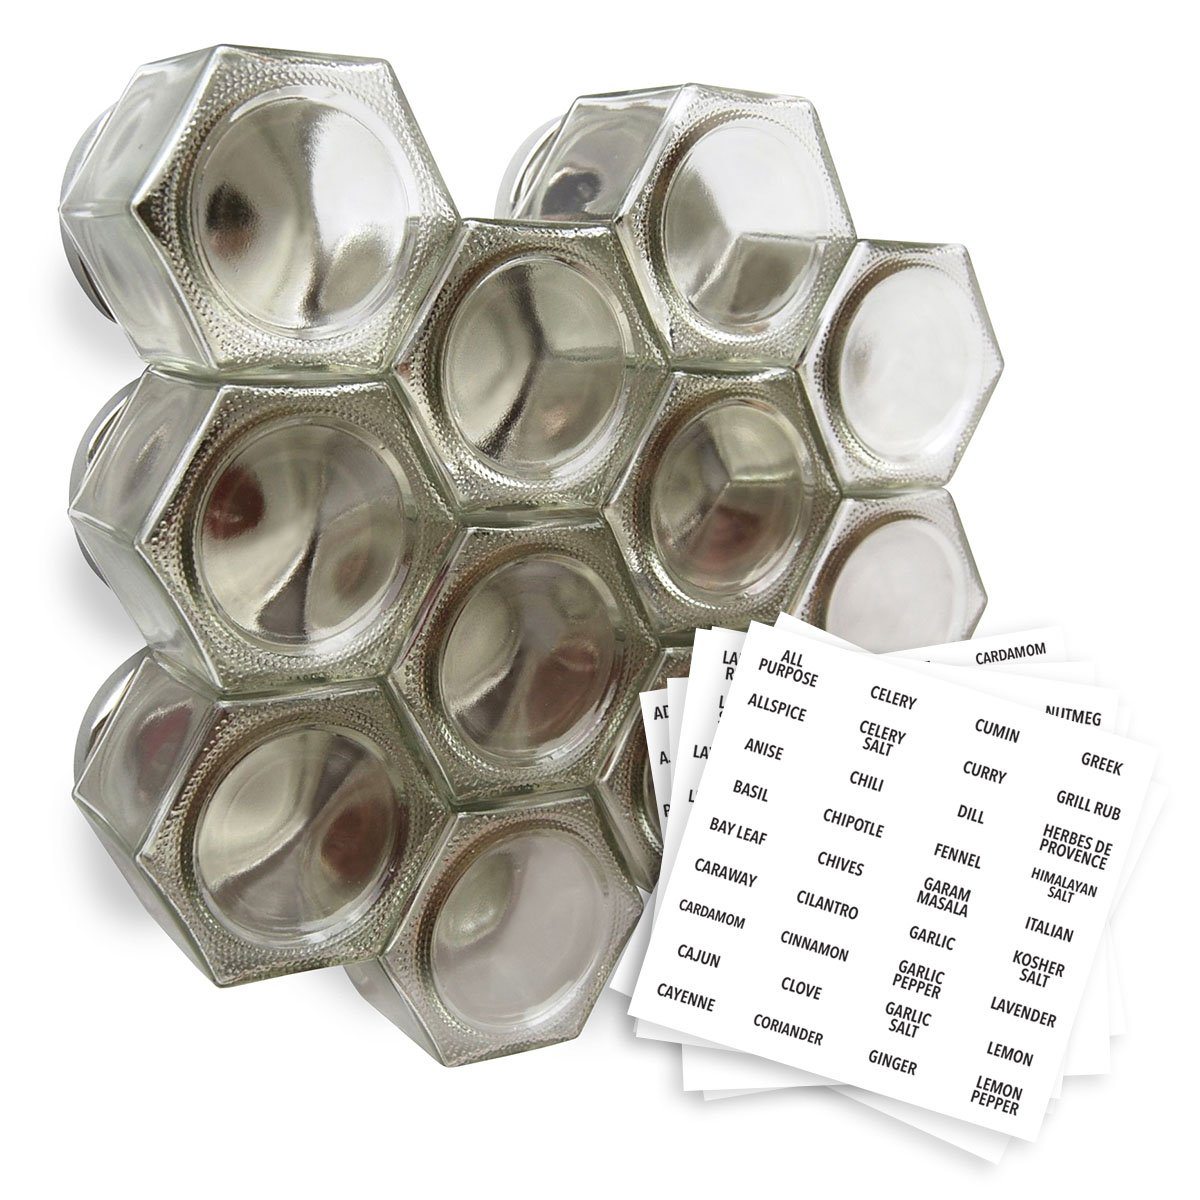 Gneiss Spice DIY Wall Hanging Magnetic Spice Rack (24 Small Jars, Silver Lids, 12x15 Stainless Plate)